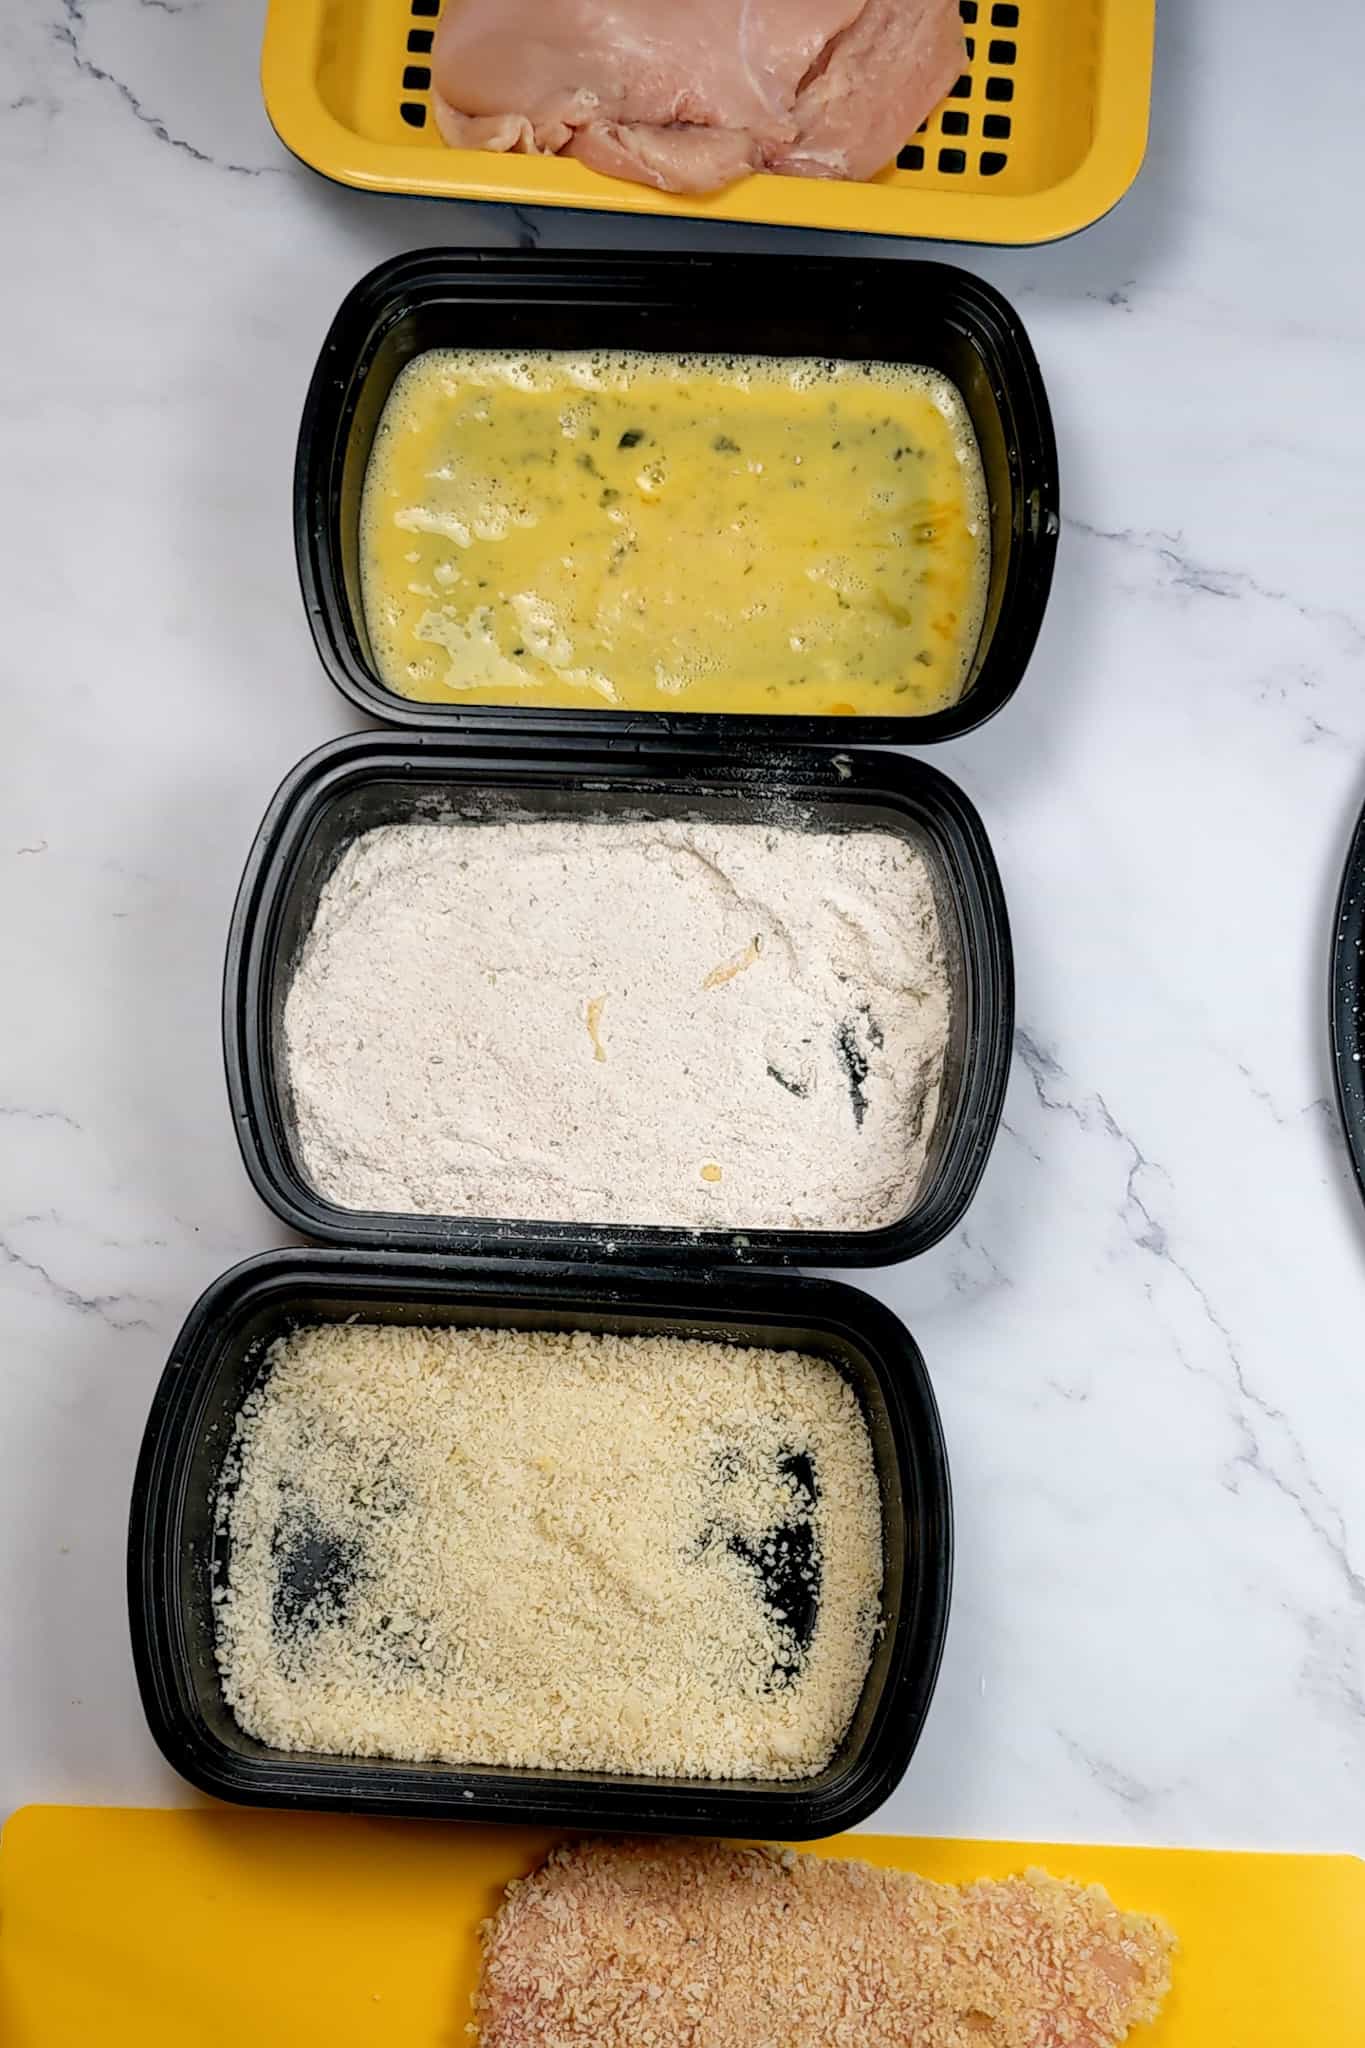 meat draining container with raw chicken cutlets assembled next to three shallow trays, one with beaten eggs, another with flour and the last one with panko breadcrumbs and next to that a yellow cutting board mat with a breaded raw chicken cutlet